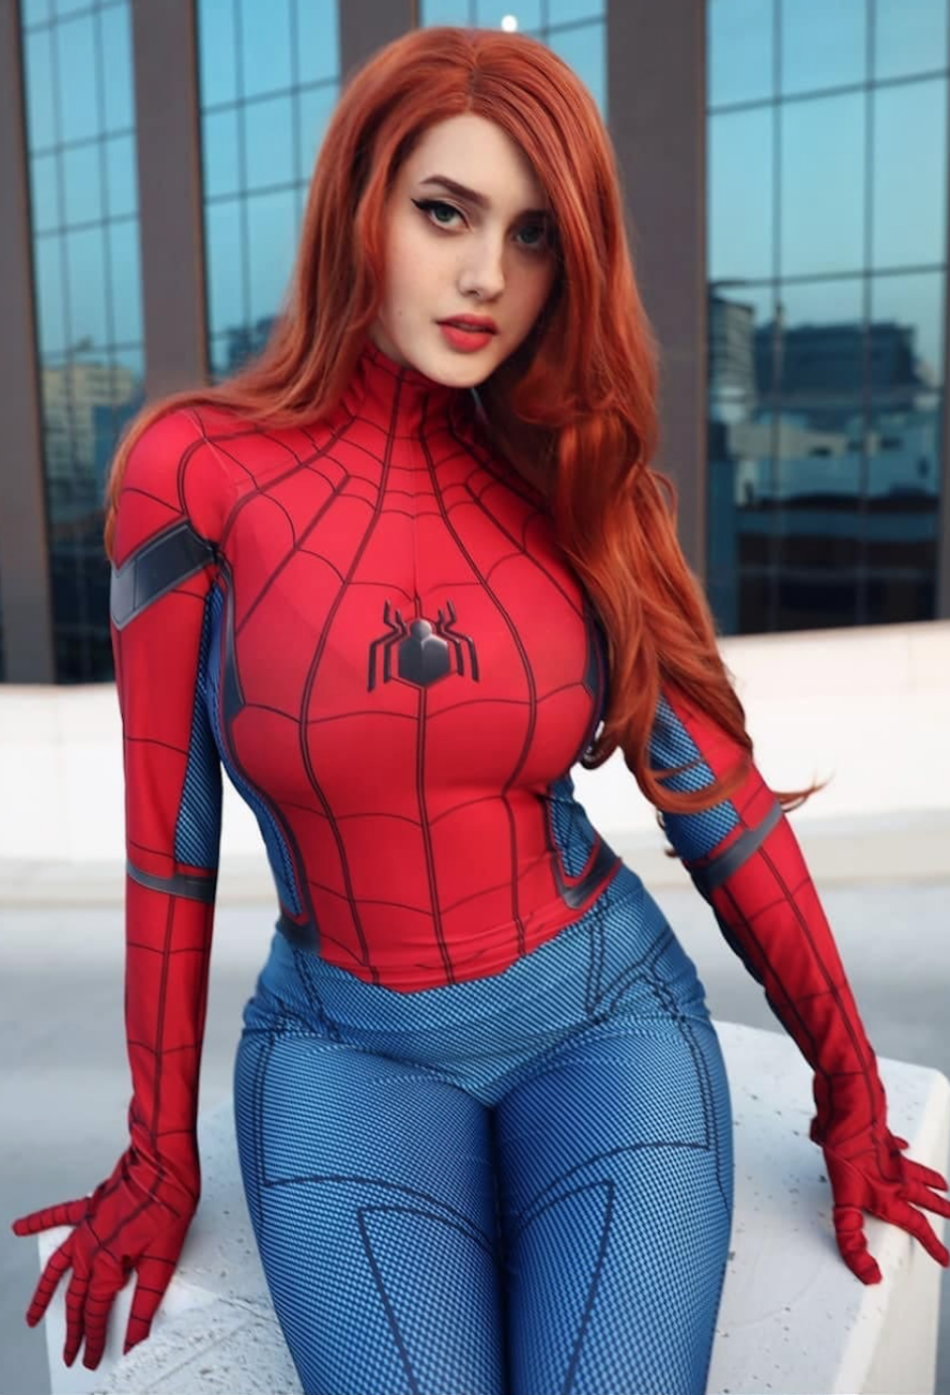 Sexy Red Hot Cosplay Girls Spiderman Women Best Photo Compilation 2021 (89 HQ Photos) 456